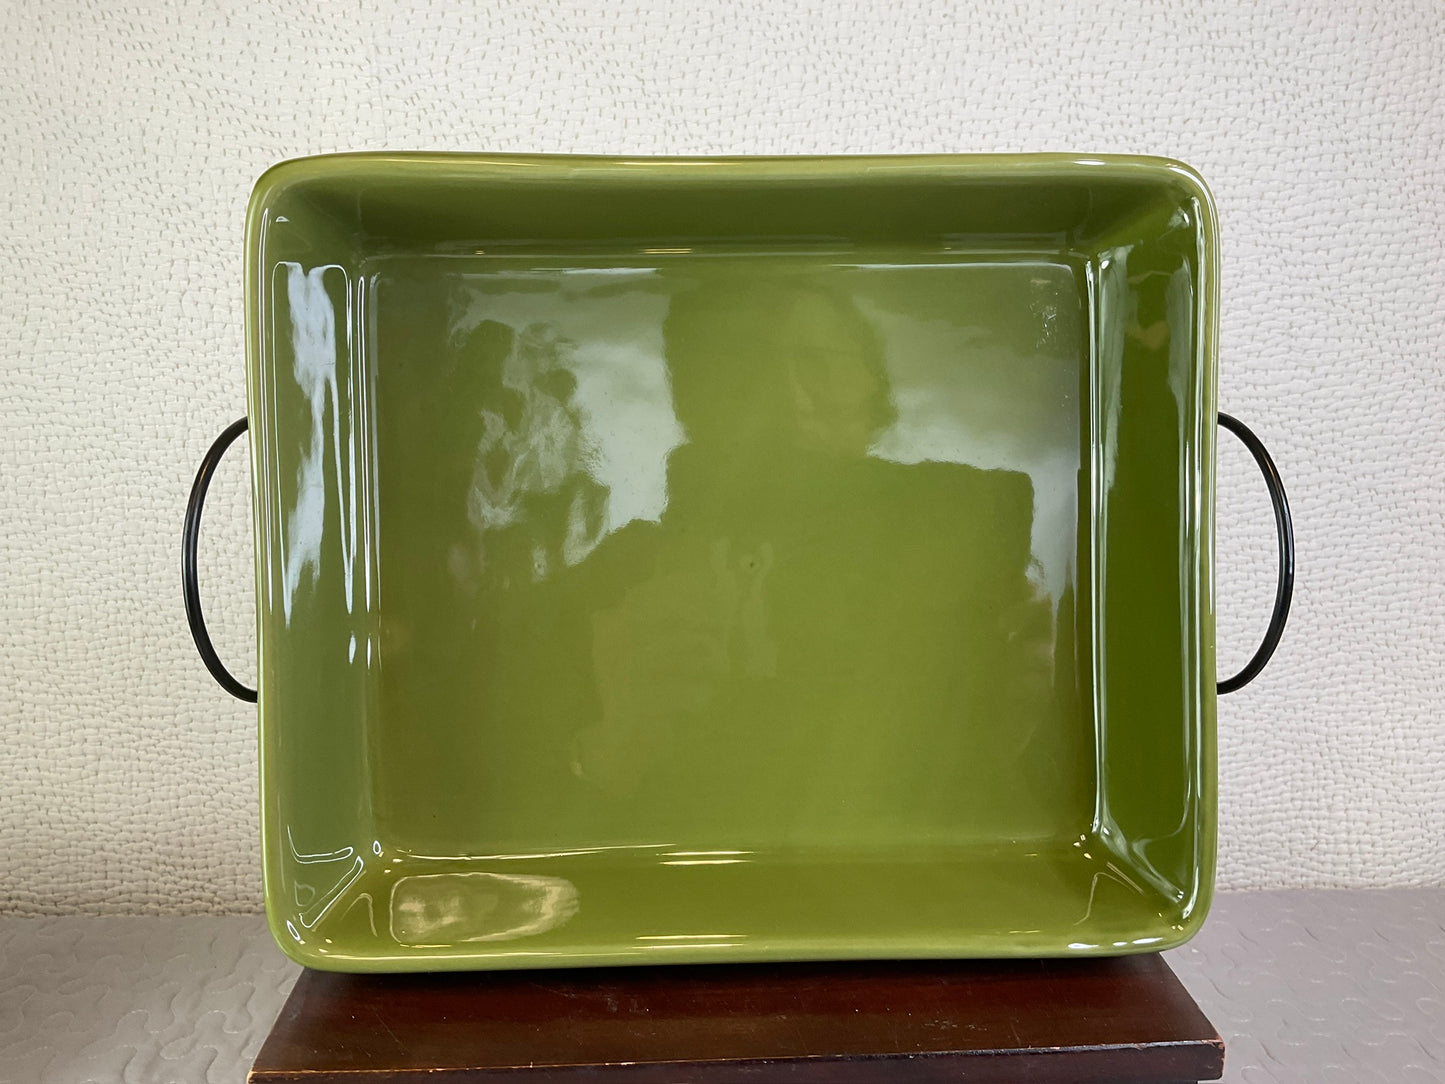 Vintage Temp-Tations Green Embossed Casserole Ovenware, Sold Separately